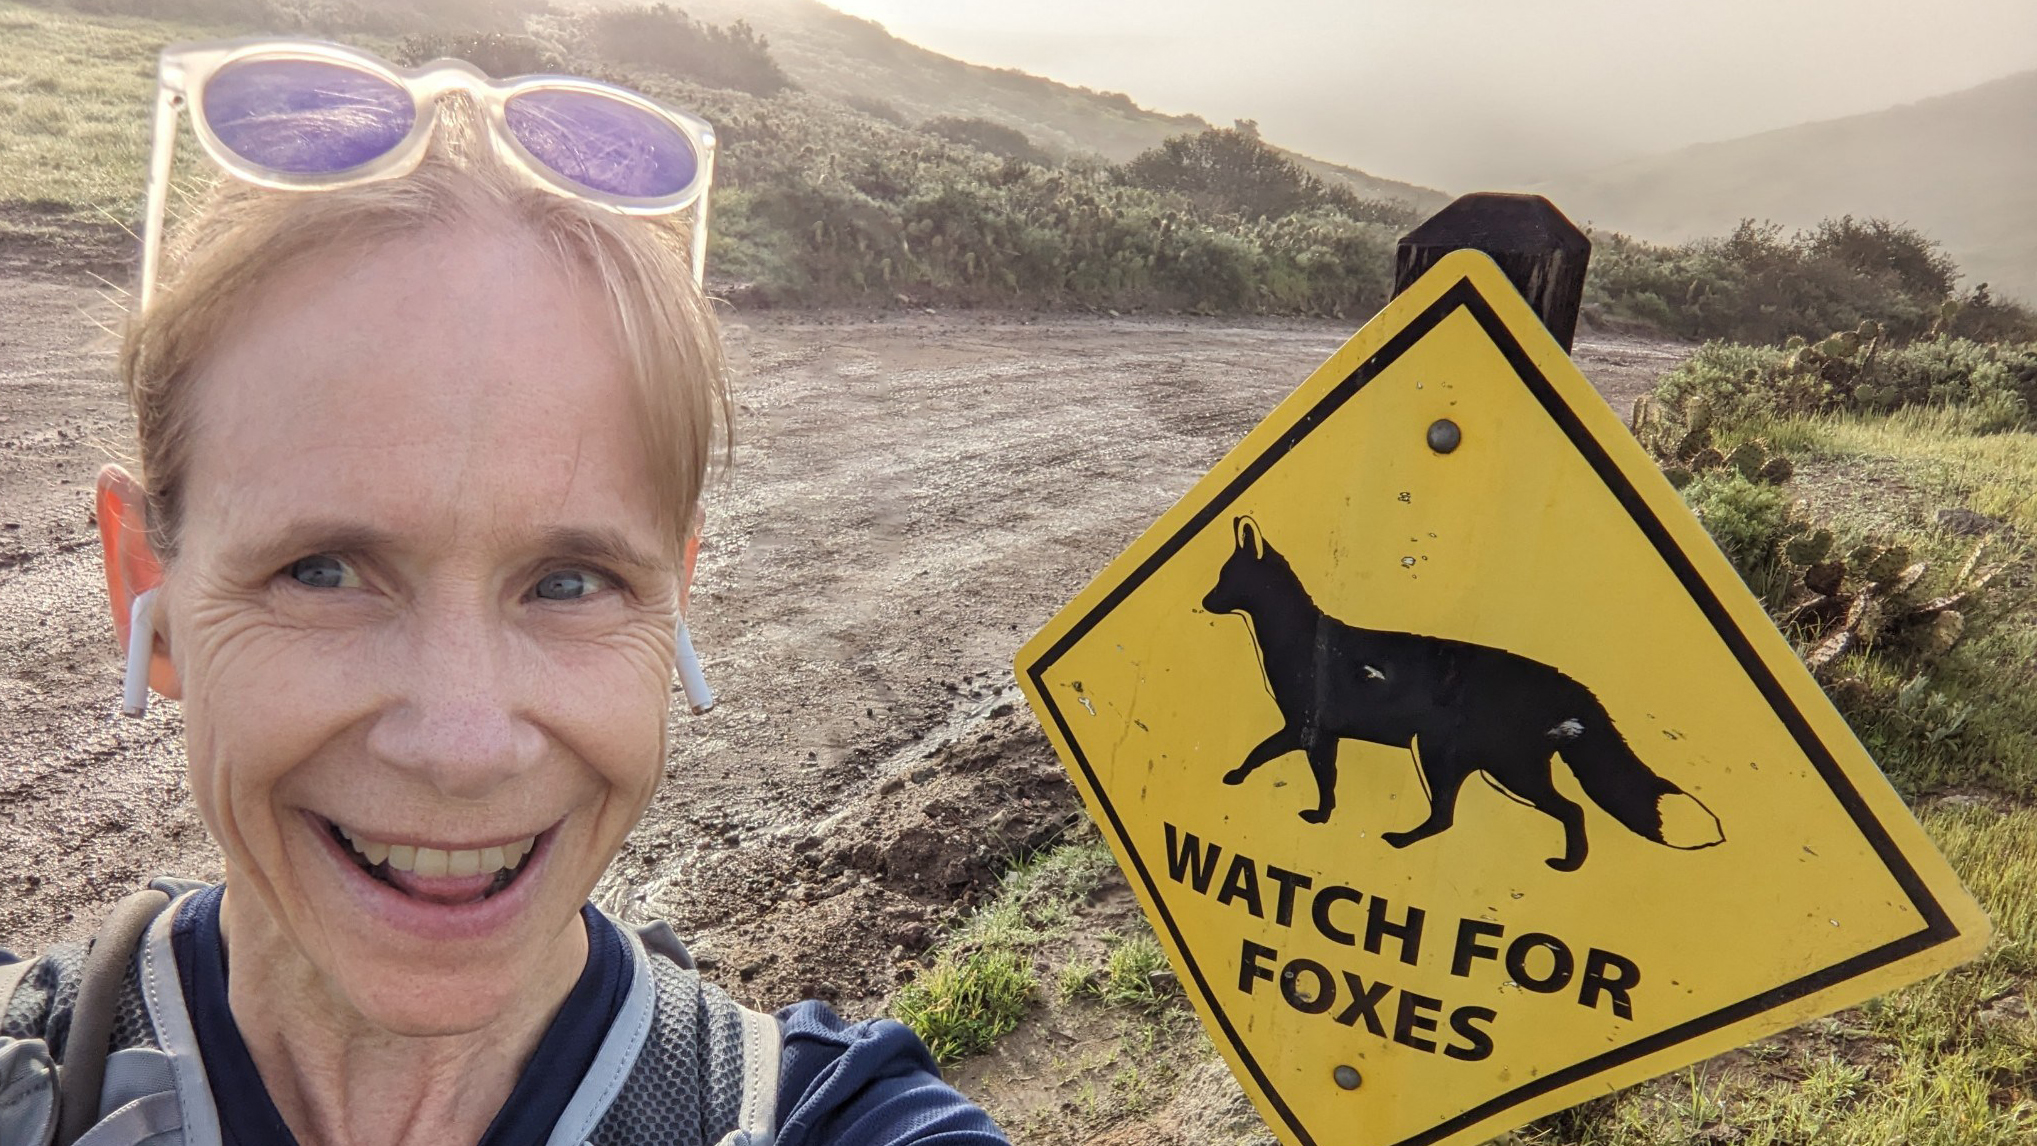 Suzanne Edmands, wearing white sunglasses on her head, smiles while standing in front of a yellow diamond "Watch for Foxes" sign next to a Catalina Island hiking trail